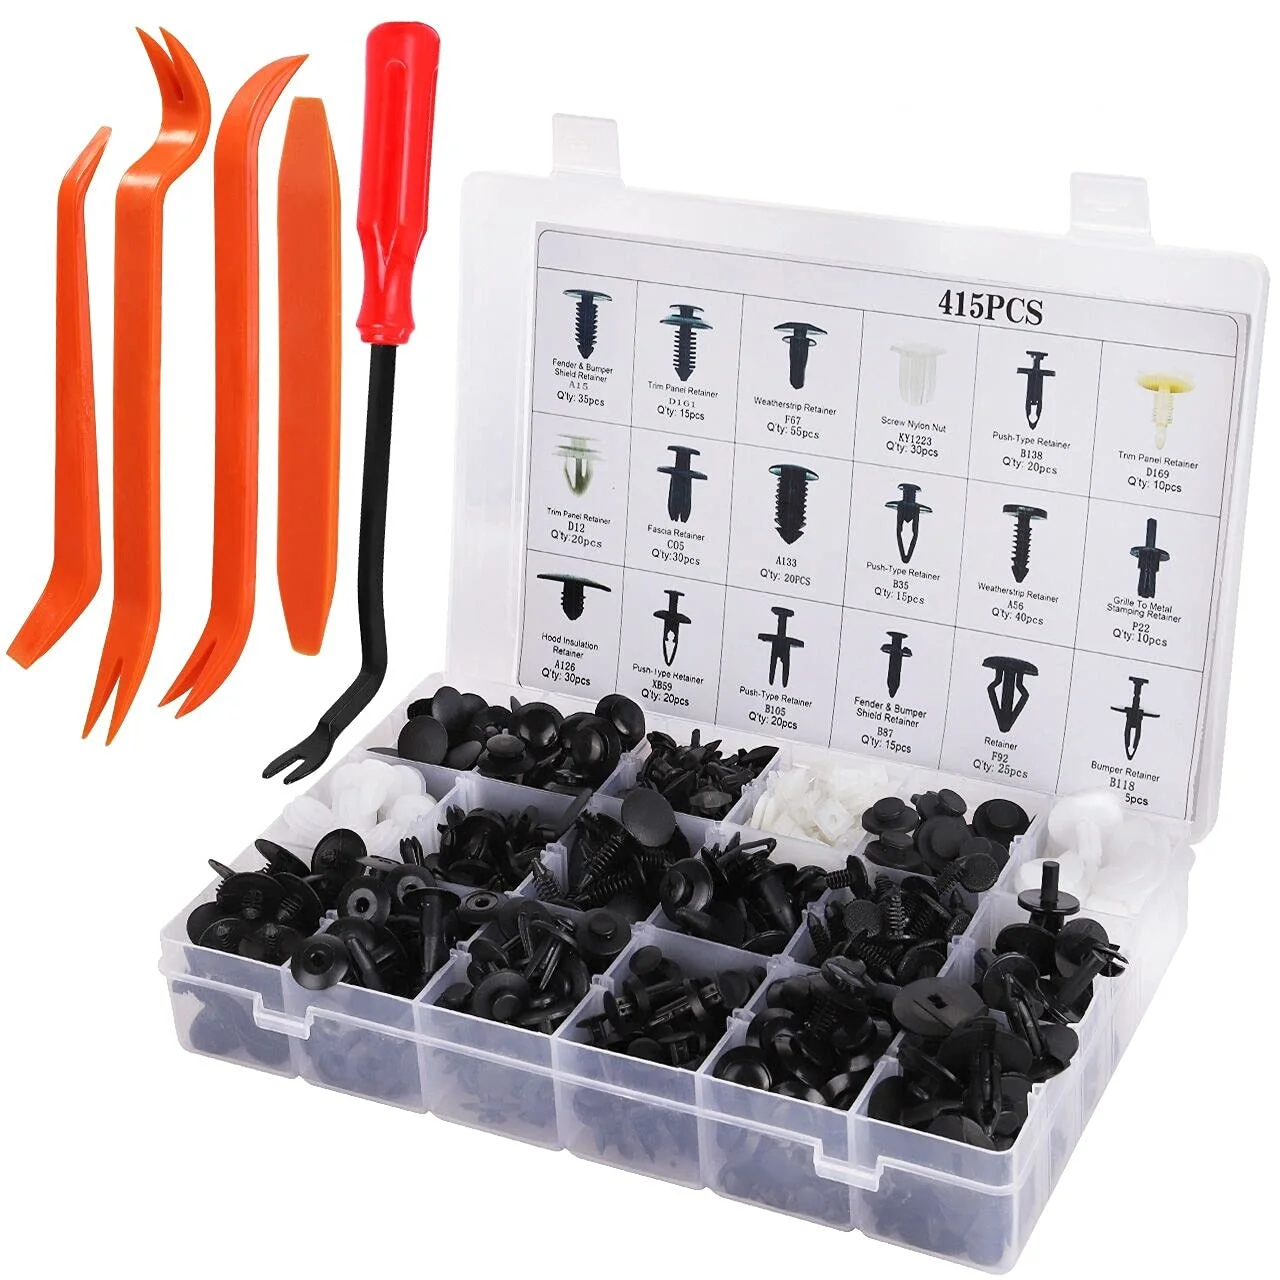 

Car Retainer Clips, 415pcs Plastic Fasteners Kit with Fastener Remover, 18 Most Popular Sizes Auto Push Pin Rivets Set for GM